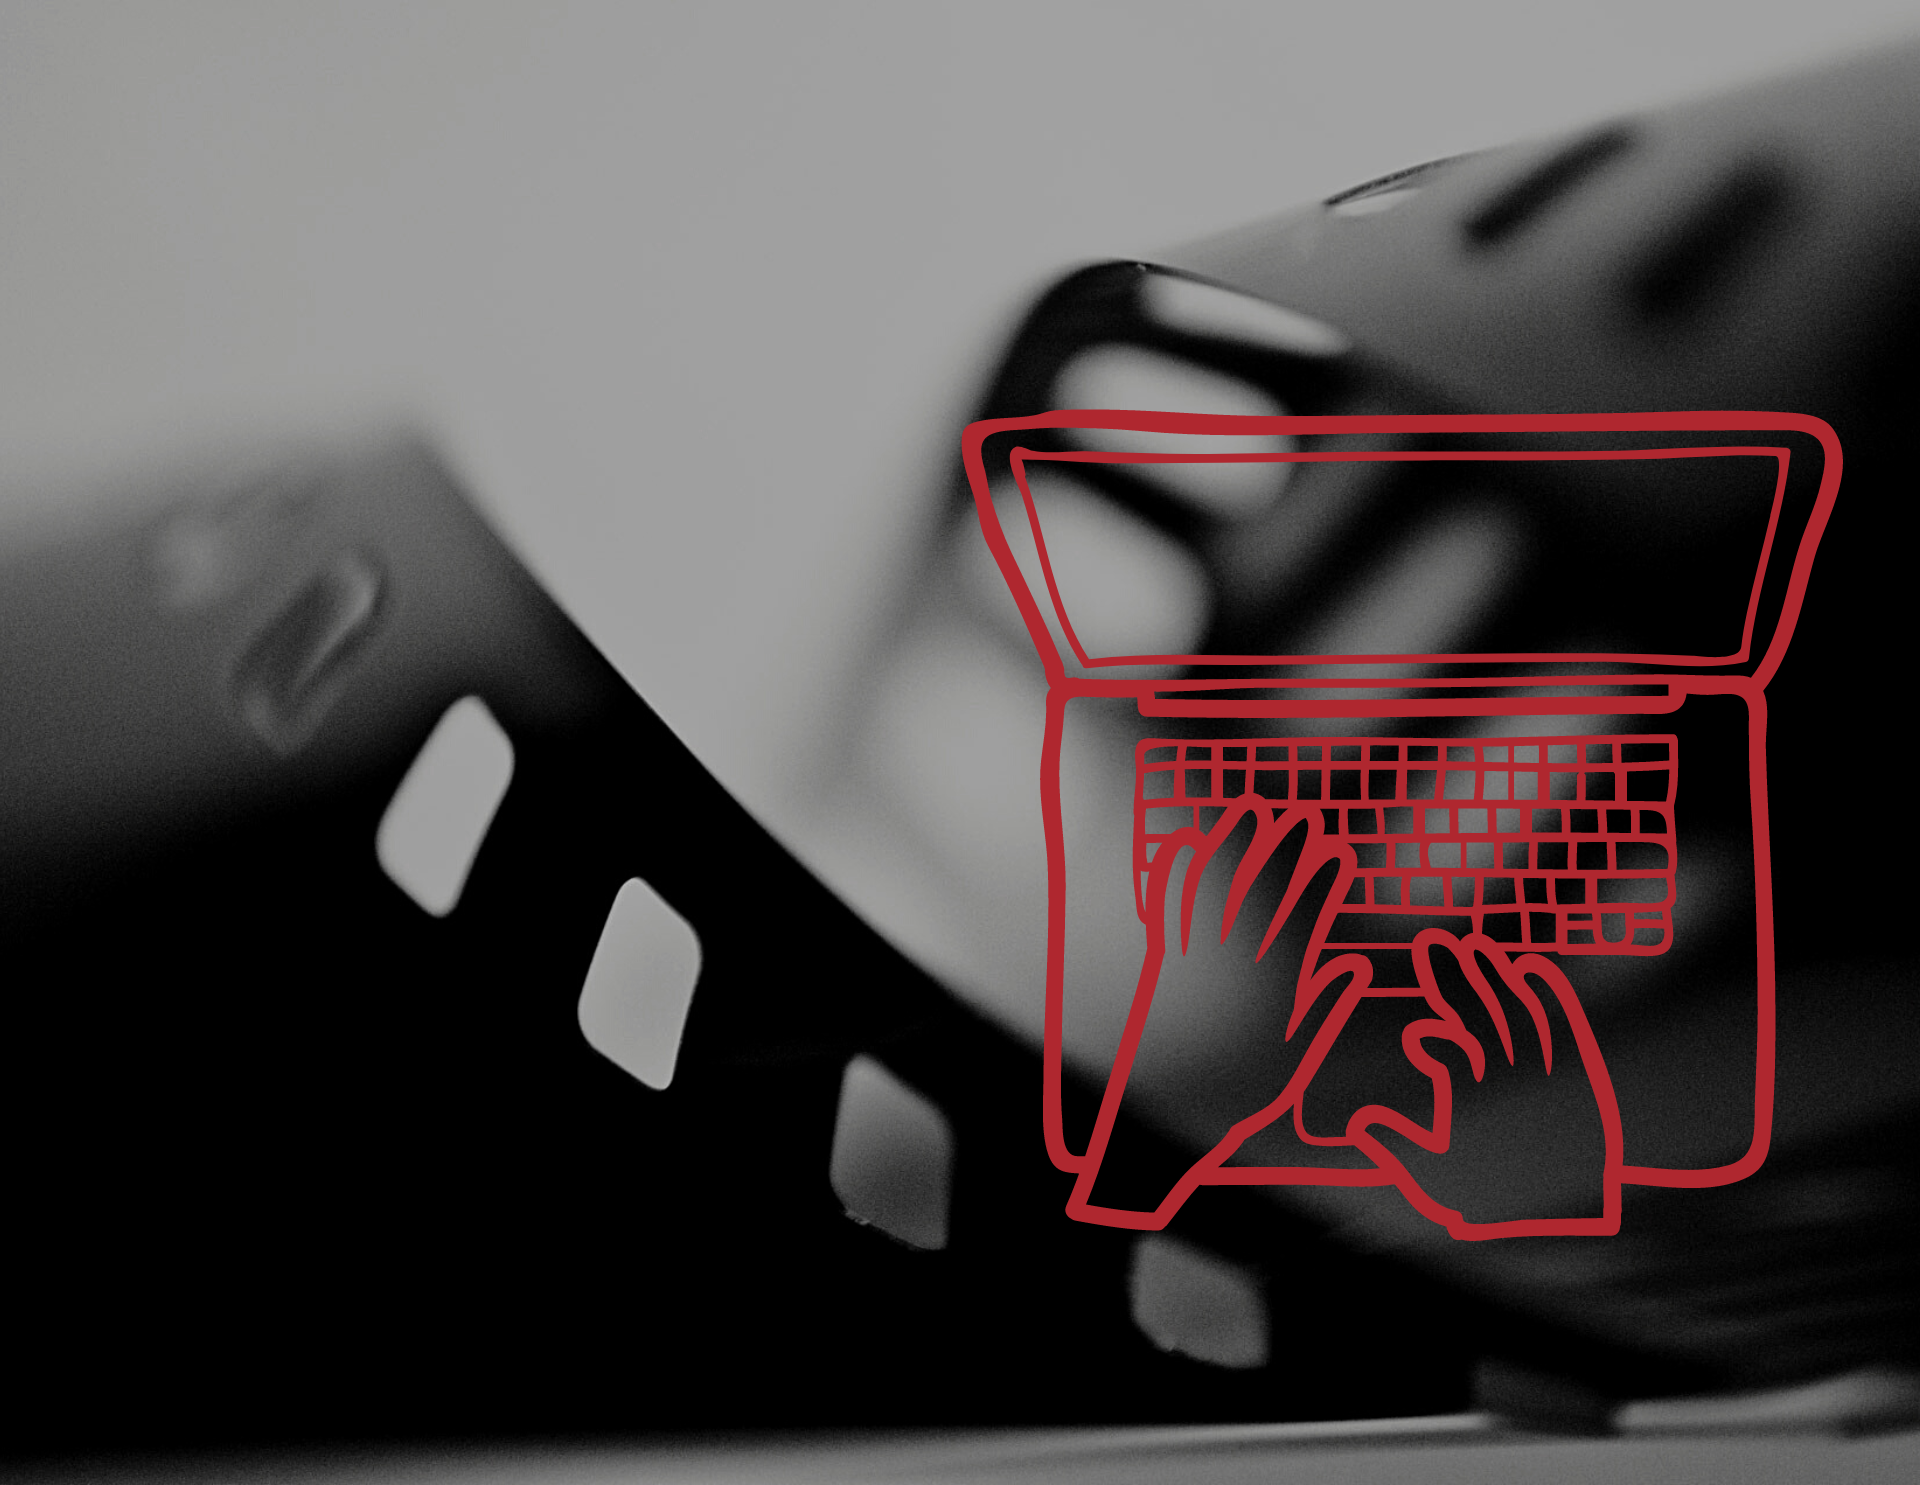 Background image: black and white close up of film strip. Foreground: red clipart picture of laptop